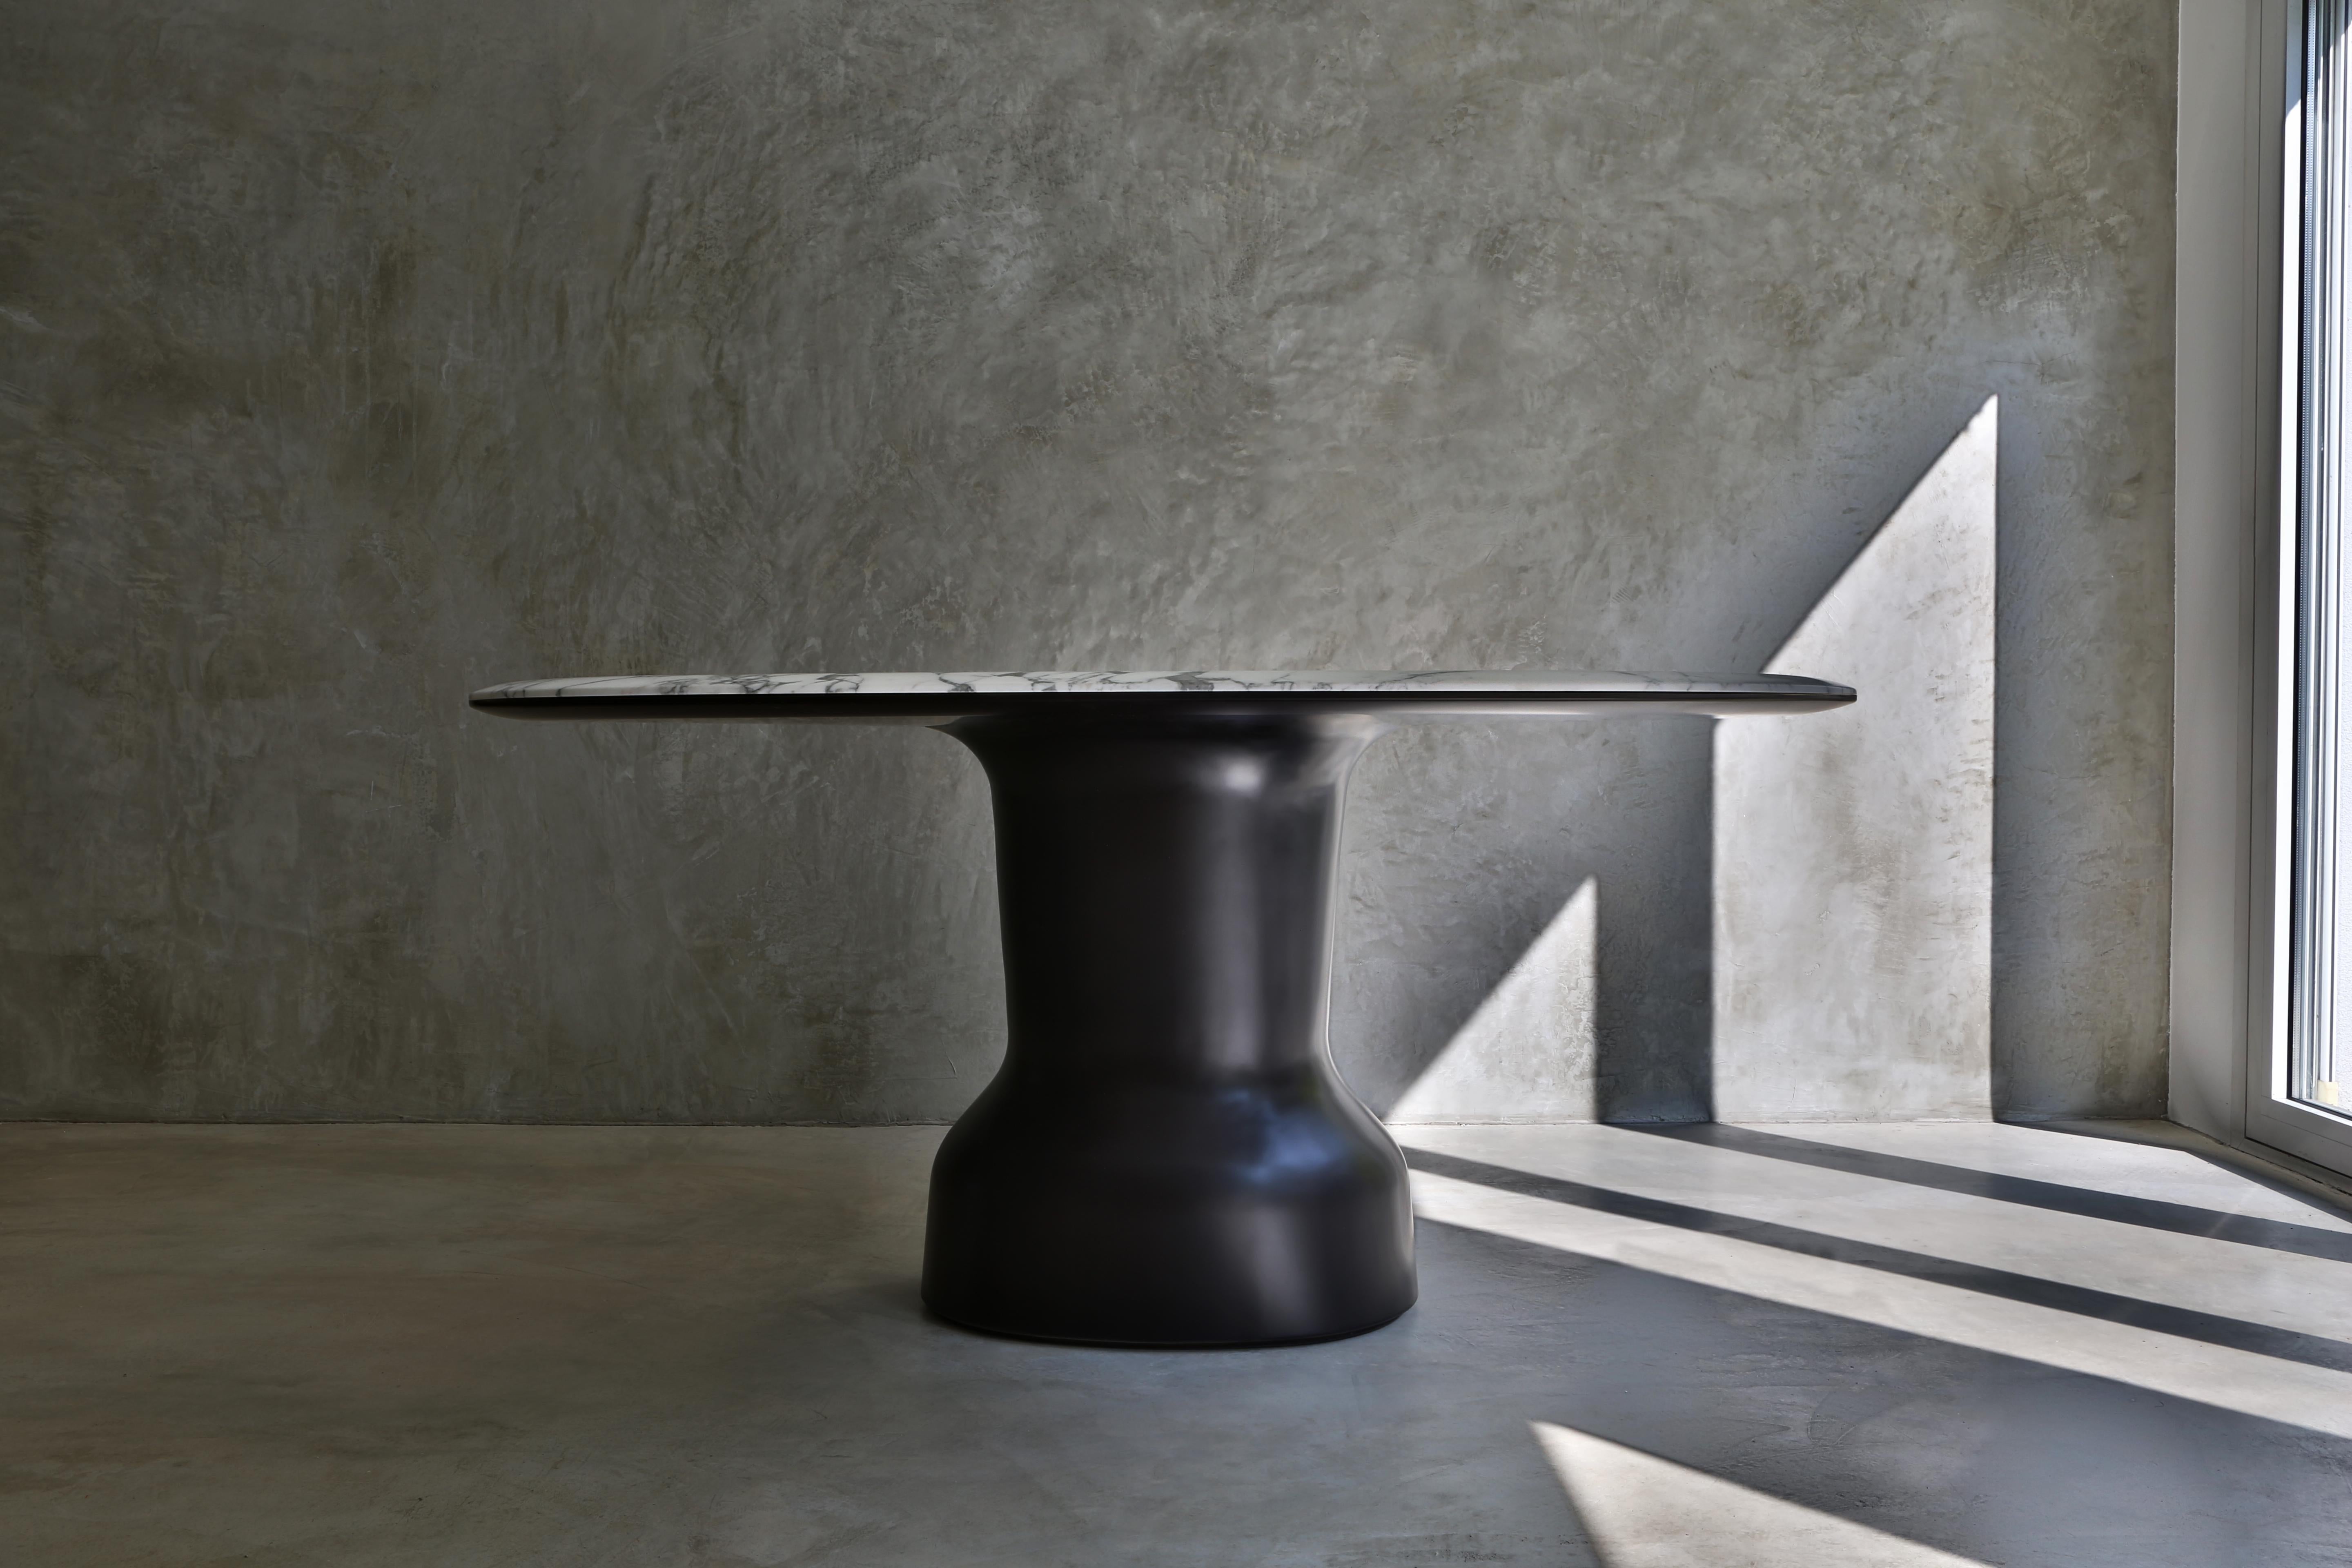 Inspired by the lithesome forms of classical sculpture and by Hans Arp’s smooth and powerful curves, the tables of the Musa series are characterised by the important plinth base with a slight oval section. 

Thanks to an accurate study of joints and